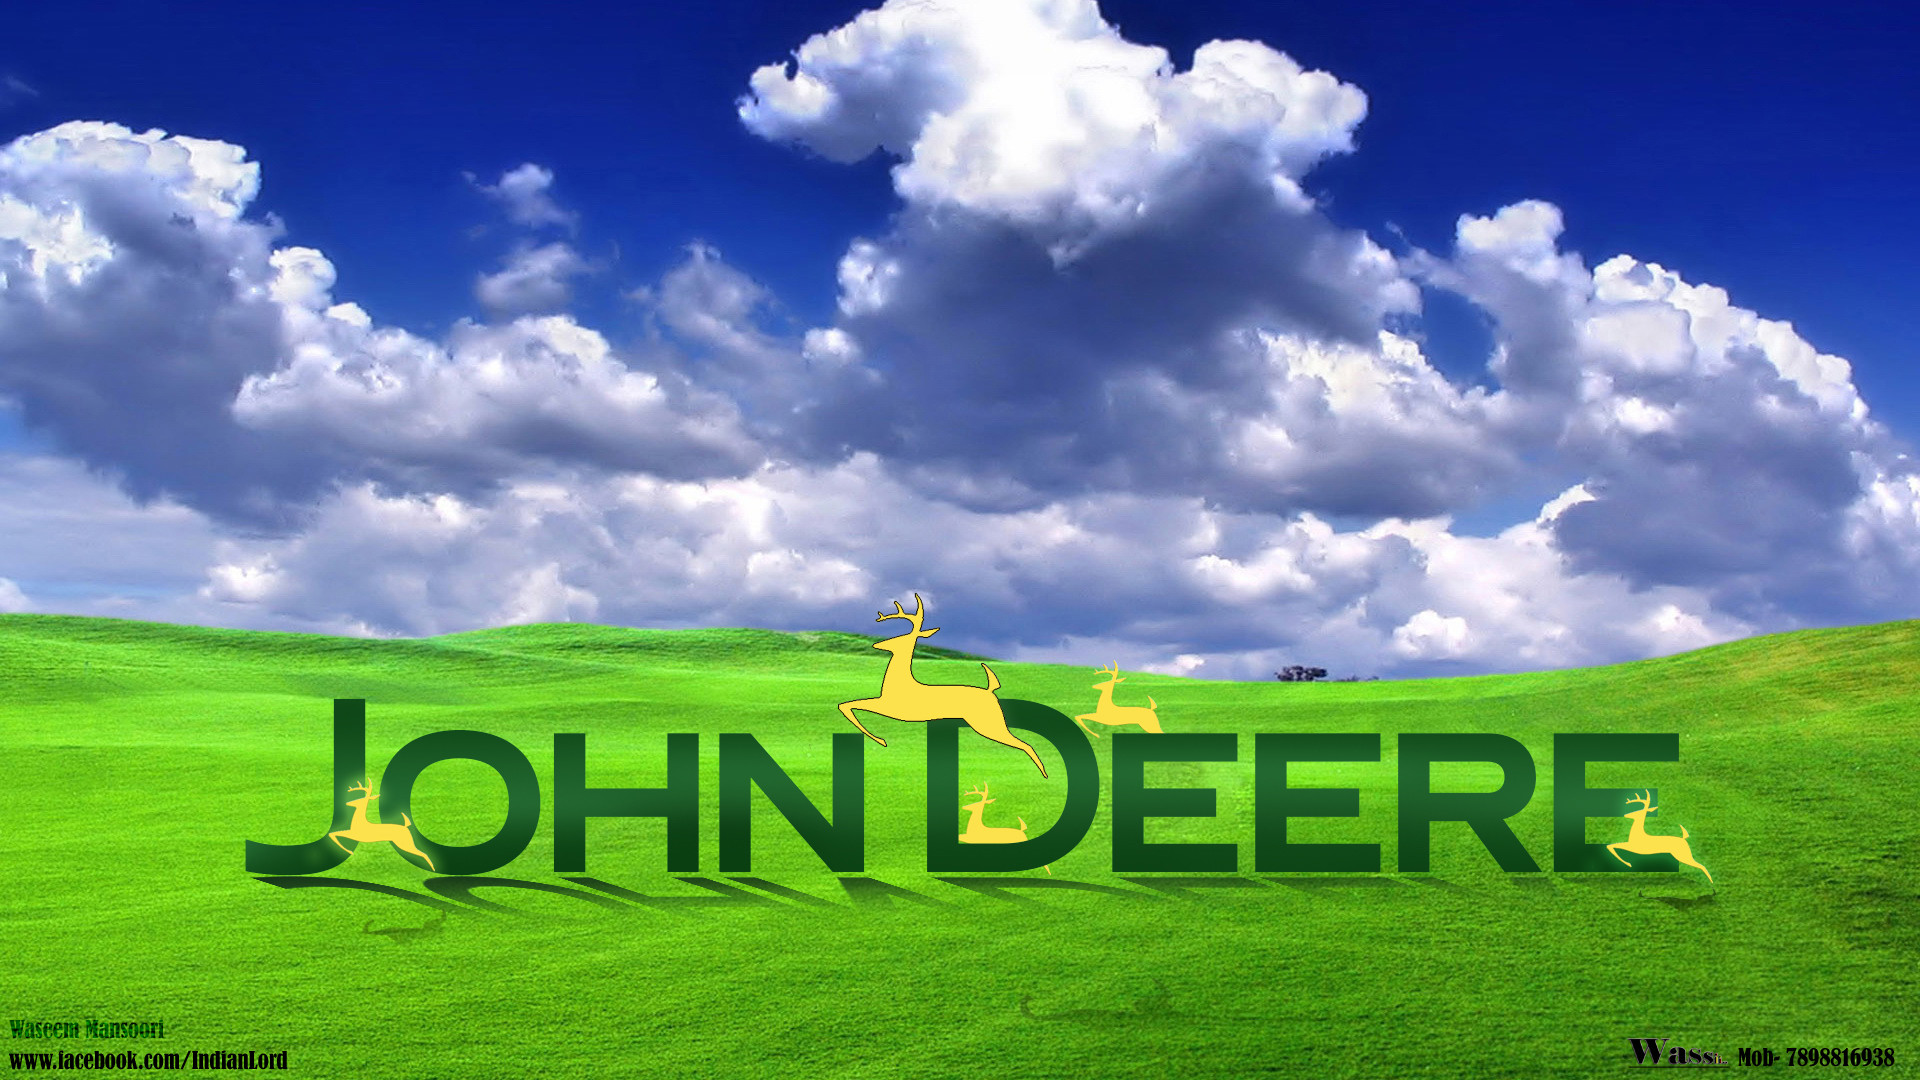 John Deere Logo Wallpaper Image And All To